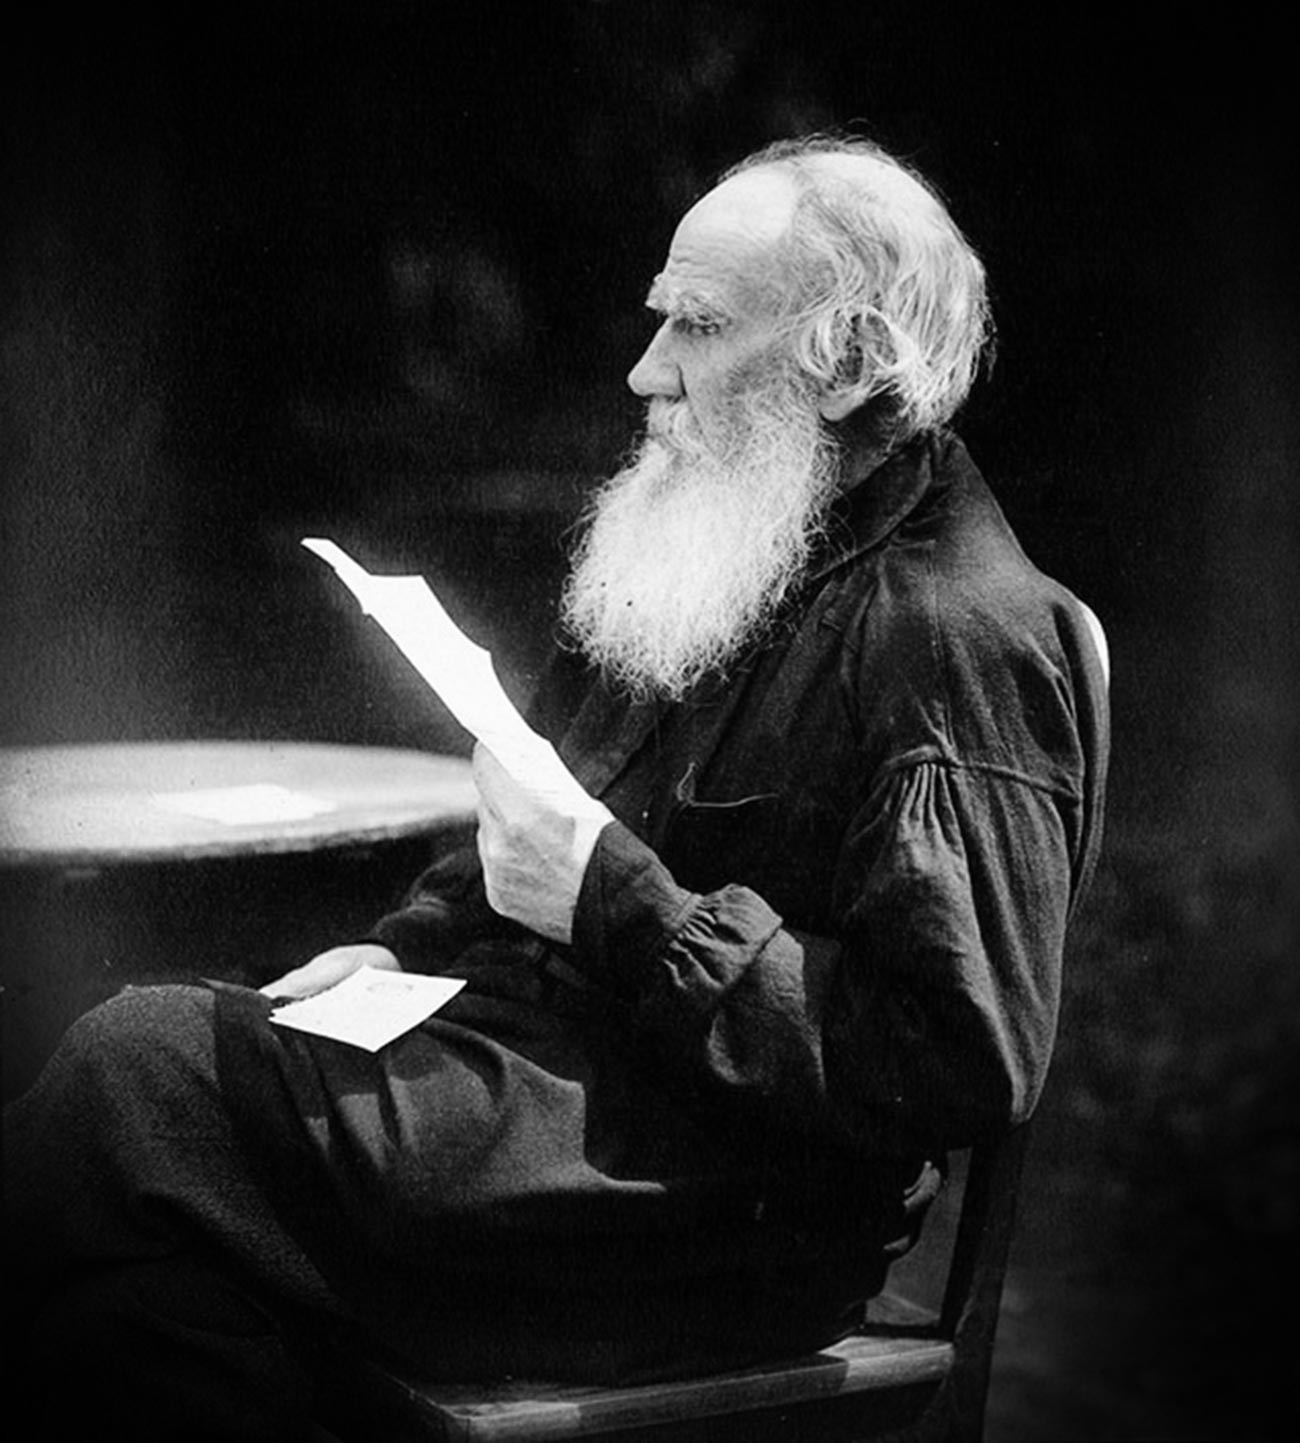 Leo Tolstoy reading a letter